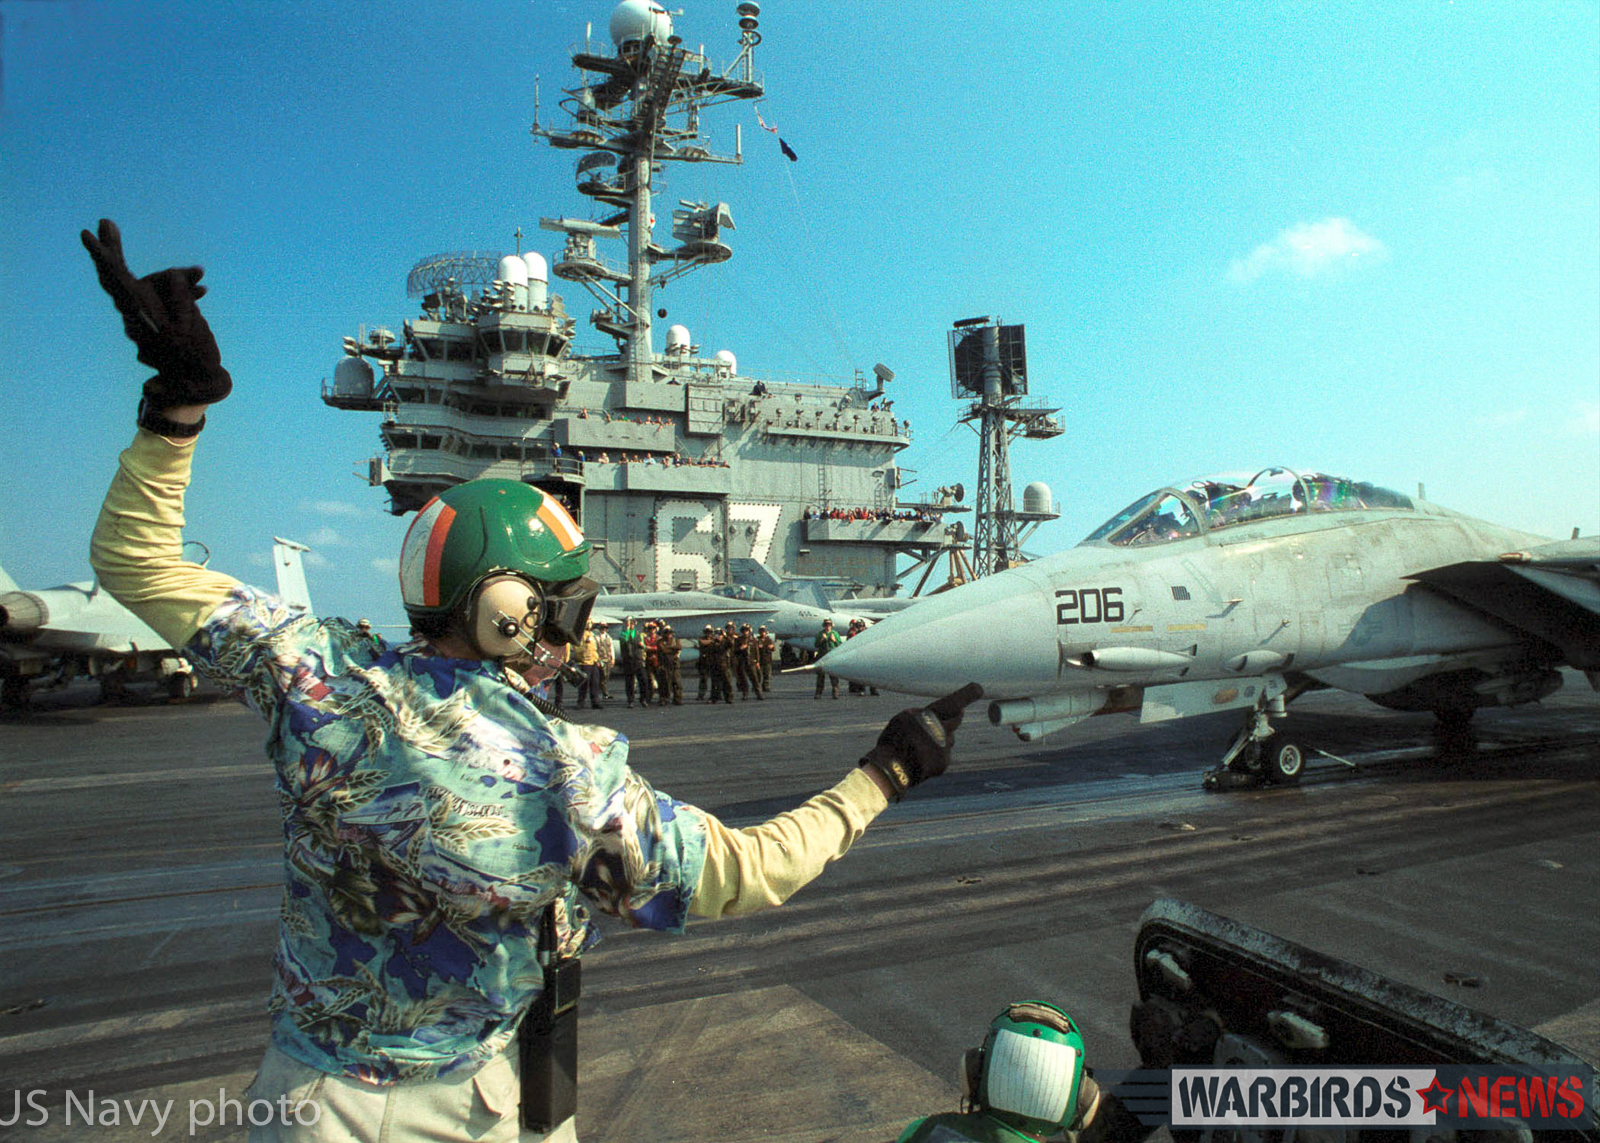 At sea aboard the aircraft carrier USS John F. Kennedy (CV 67) Aug. 14, 2002 -- The Landing Signals Officer prepares to give the signal to launch An F-14B “Tomcat” assigned to the "Red Rippers" of Fighter Squadron One One (VF 11). Launching from the flight deck of USS John F. Kennedy, the Tomcat is returning to NAS Oceana prior to the homecoming of Carrier Air Wing Seven (CVW 7) August 14, 2002. The Kennedy and CVW 7 are returning home after a six-month deployment in support of Operation Enduring Freedom. U.S Navy photo by Photographer's Mate Airman Joshua Karsten. (RELEASED)